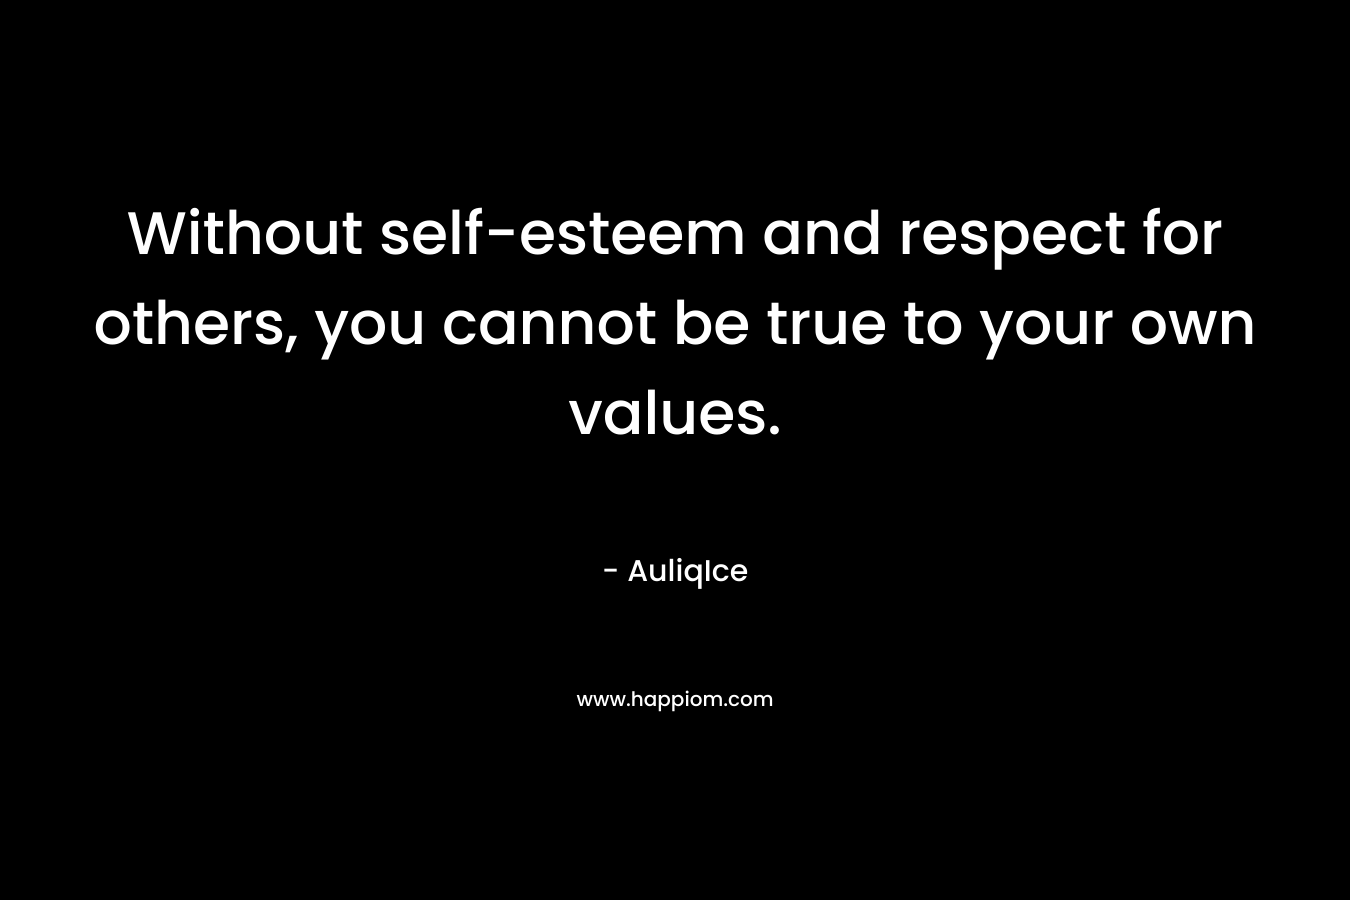 Without self-esteem and respect for others, you cannot be true to your own values.